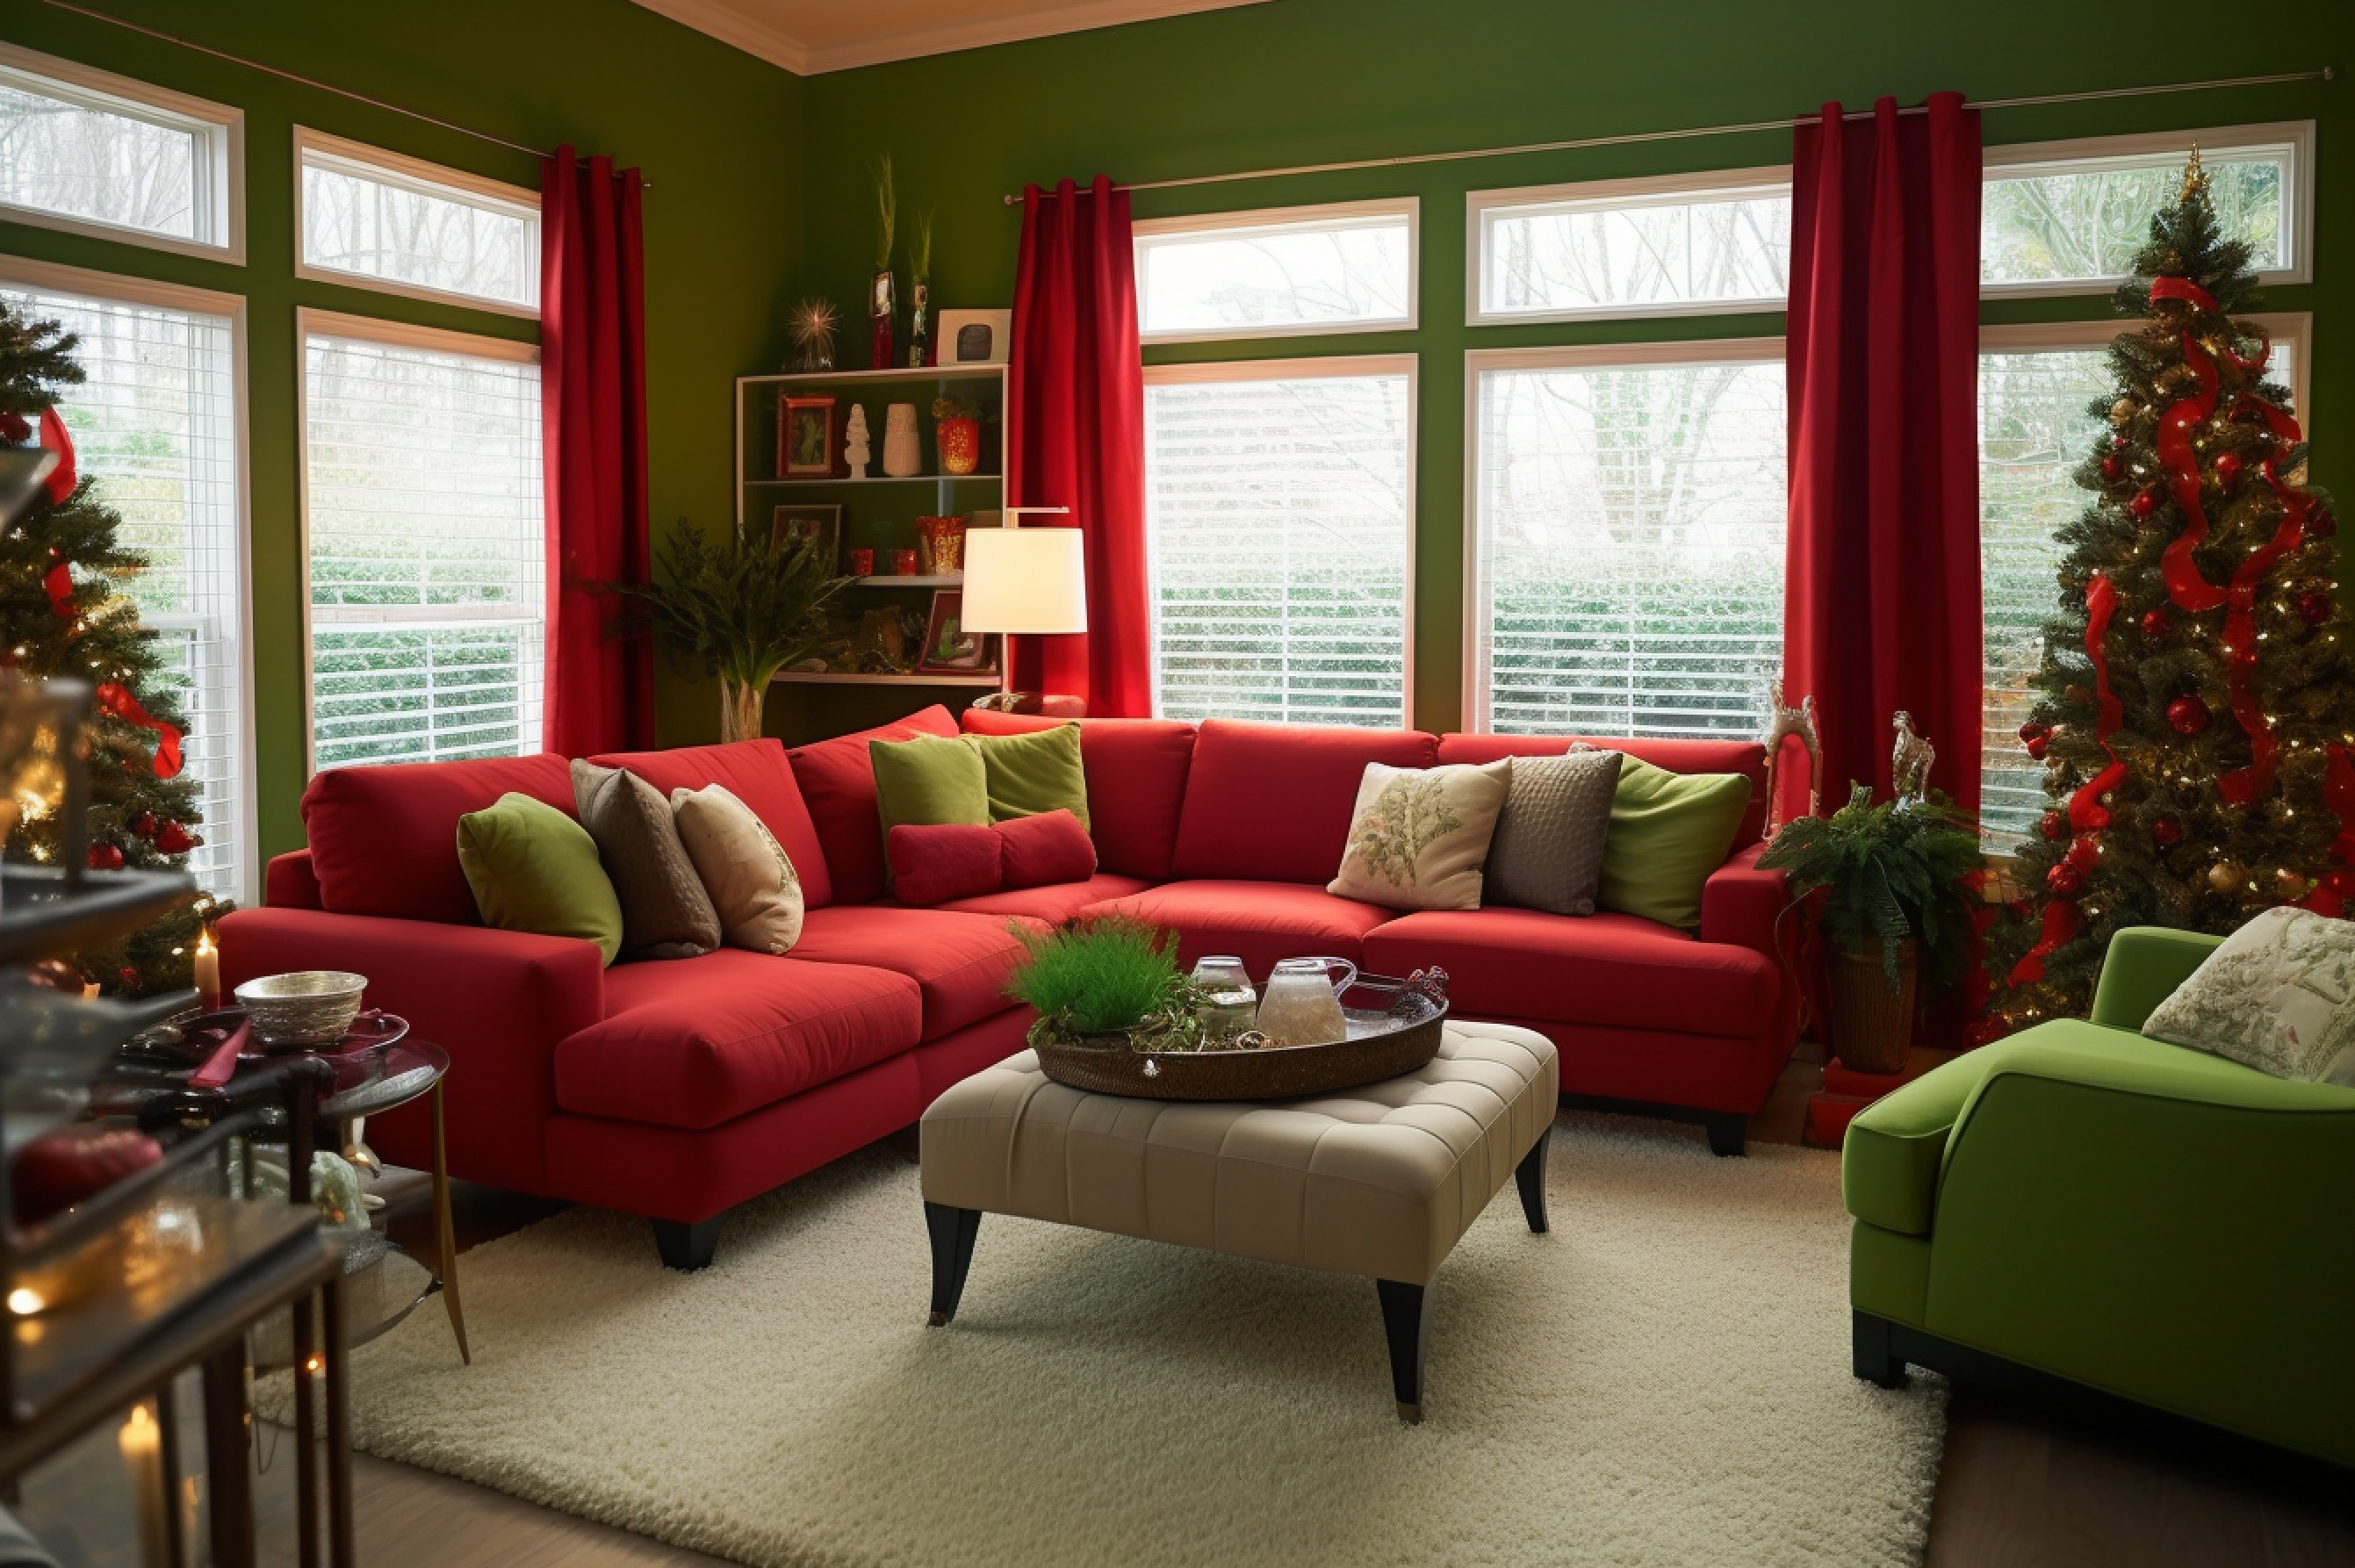 10. Red and Lime Green Christmas Scheme. A family room that's decked the halls in festive red and lime green.